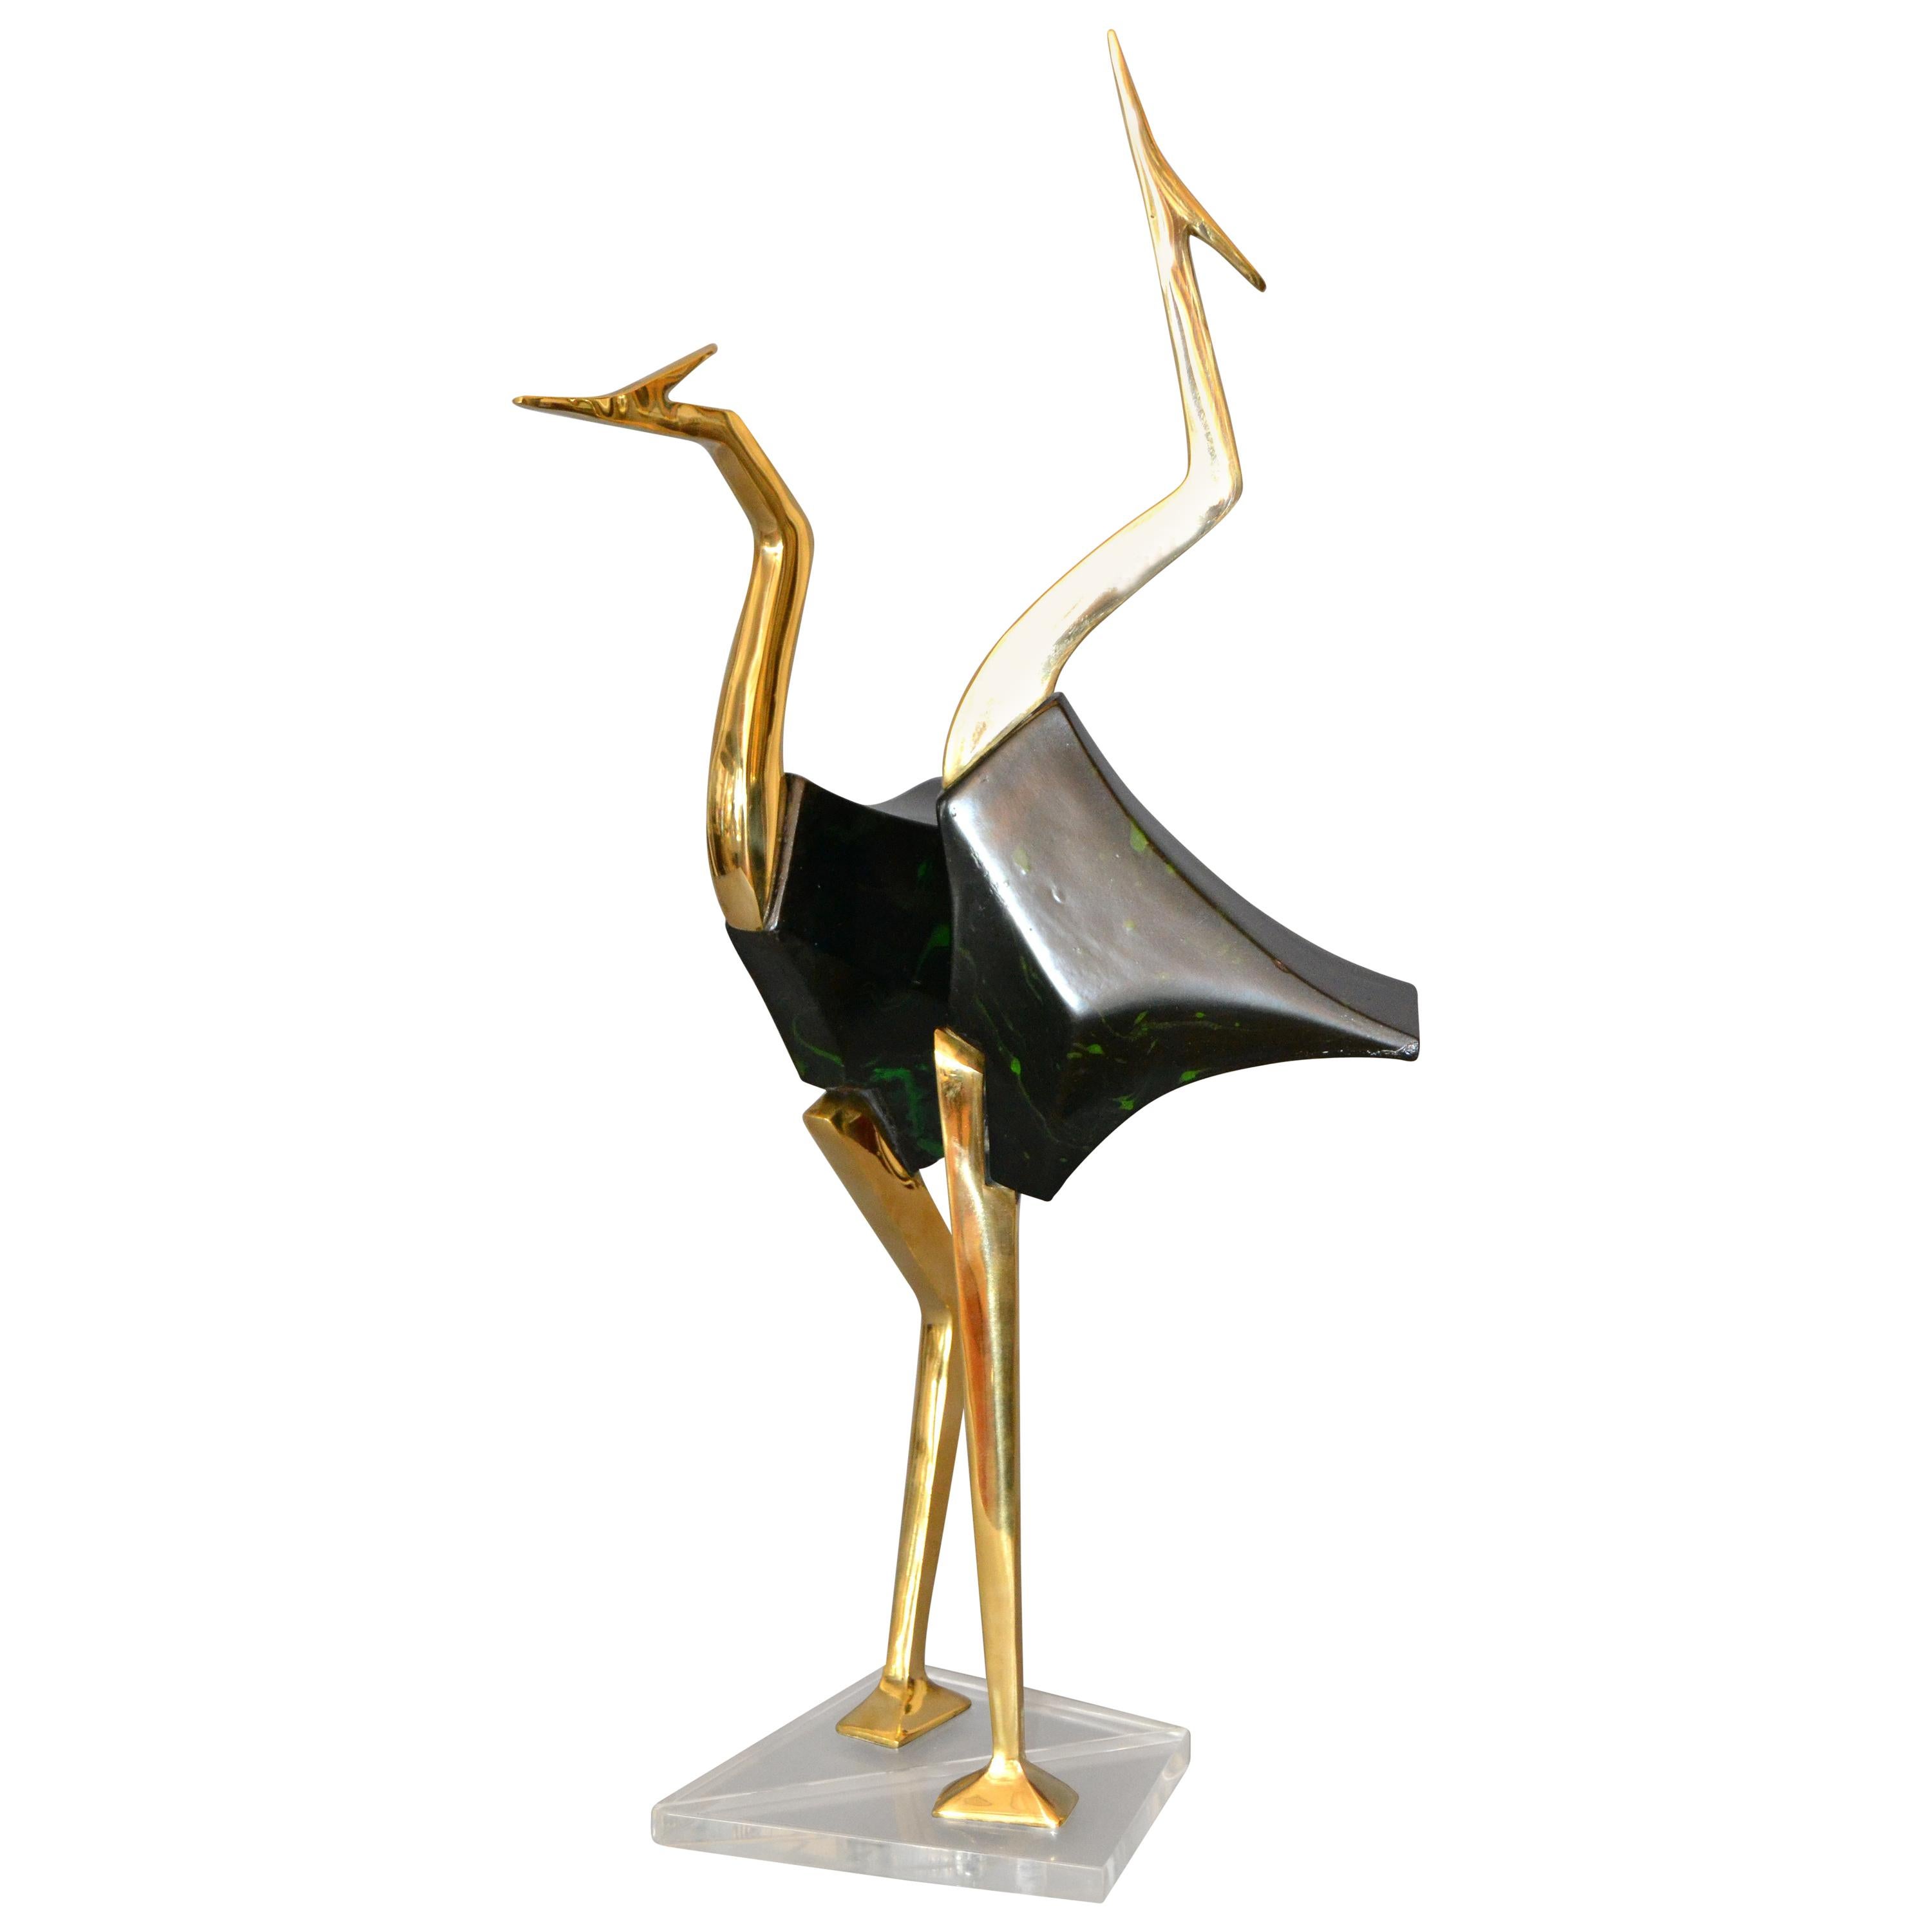 Stylized Brass and Wood Crane Sculptures on Lucite Base, a Pair For Sale